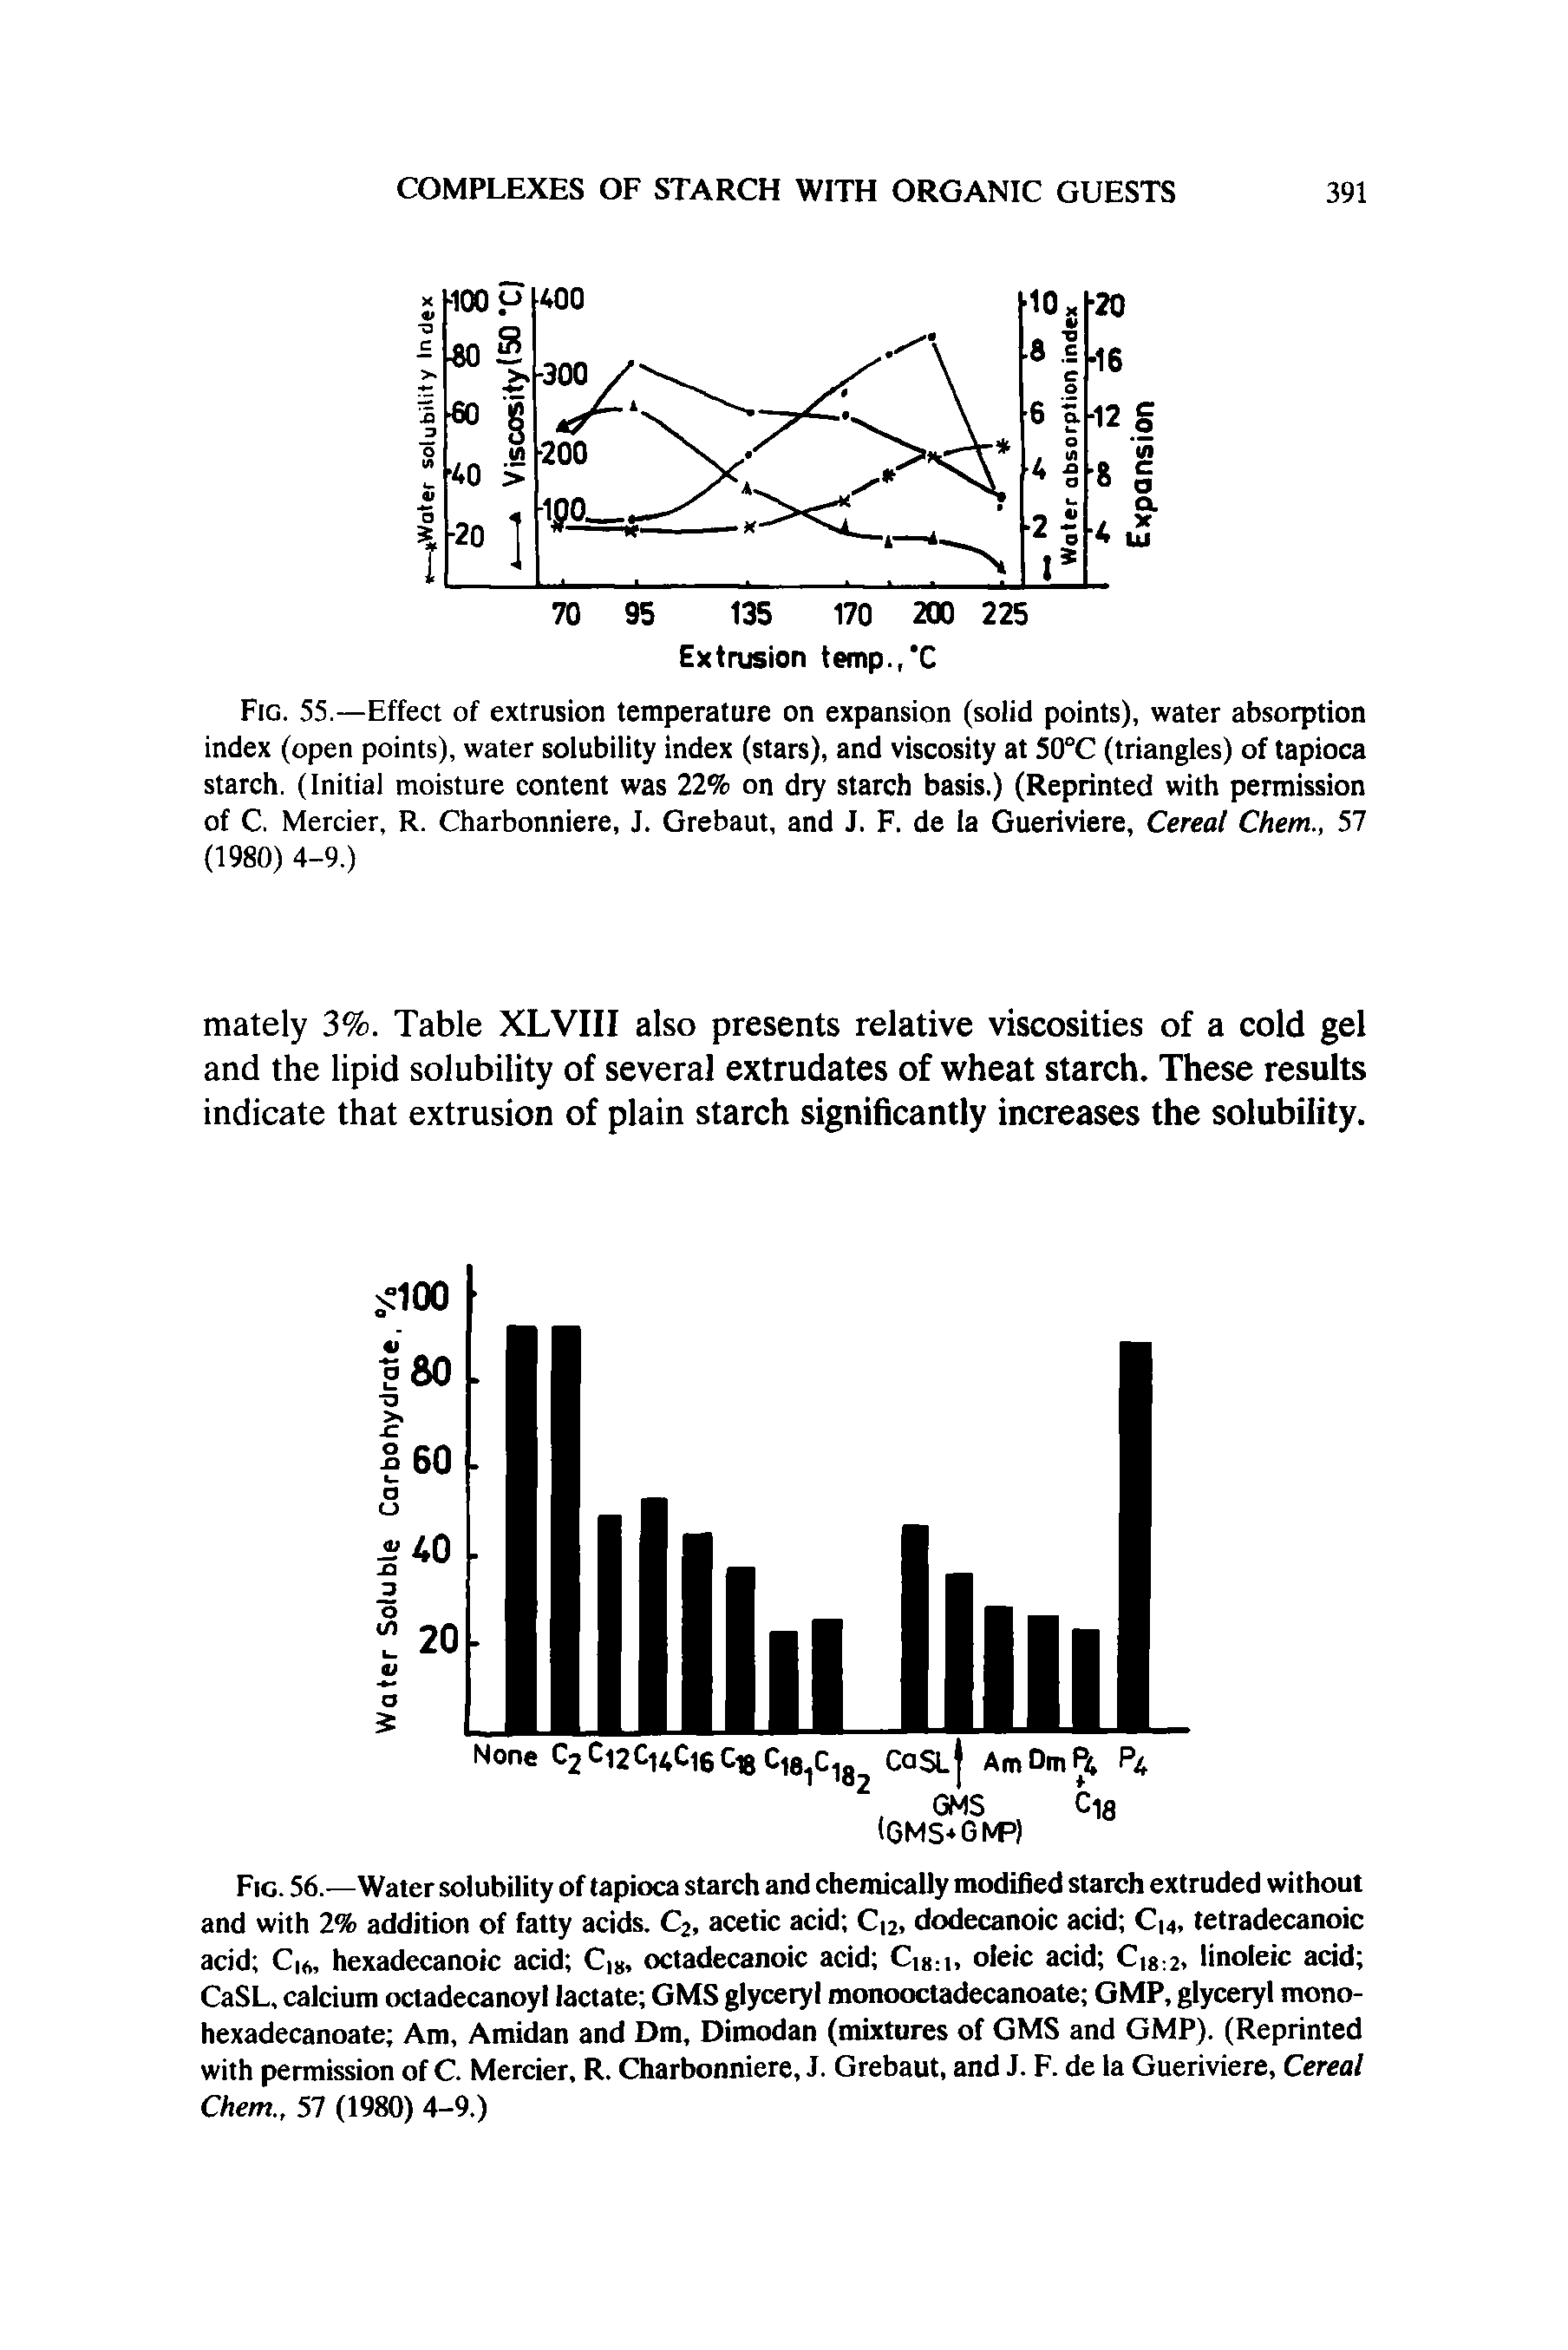 Fig. 56.—Water solubility of tapioca starch and chemically modified starch extruded without and with 2% addition of fatty acids. C2, acetic acid C 2, dodecanoic acid C 4, tetradecanoic acid C,A, hexadecanoic acid C18, octadecanoic acid C18 i, oleic acid C 8 2, linoleic acid CaSL, calcium octadecanoyl lactate GMS glyceryl monooctadecanoate GMP, glyceryl mono-hexadecanoate Am, Amidan and Dm, Dimodan (mixtures of GMS and GMP). (Reprinted with permission of C. Mercier, R. Charbonniere, J. Grebaut, and J. F. de la Gueriviere, Cereal Chem., 57 (1980) 4-9.)...